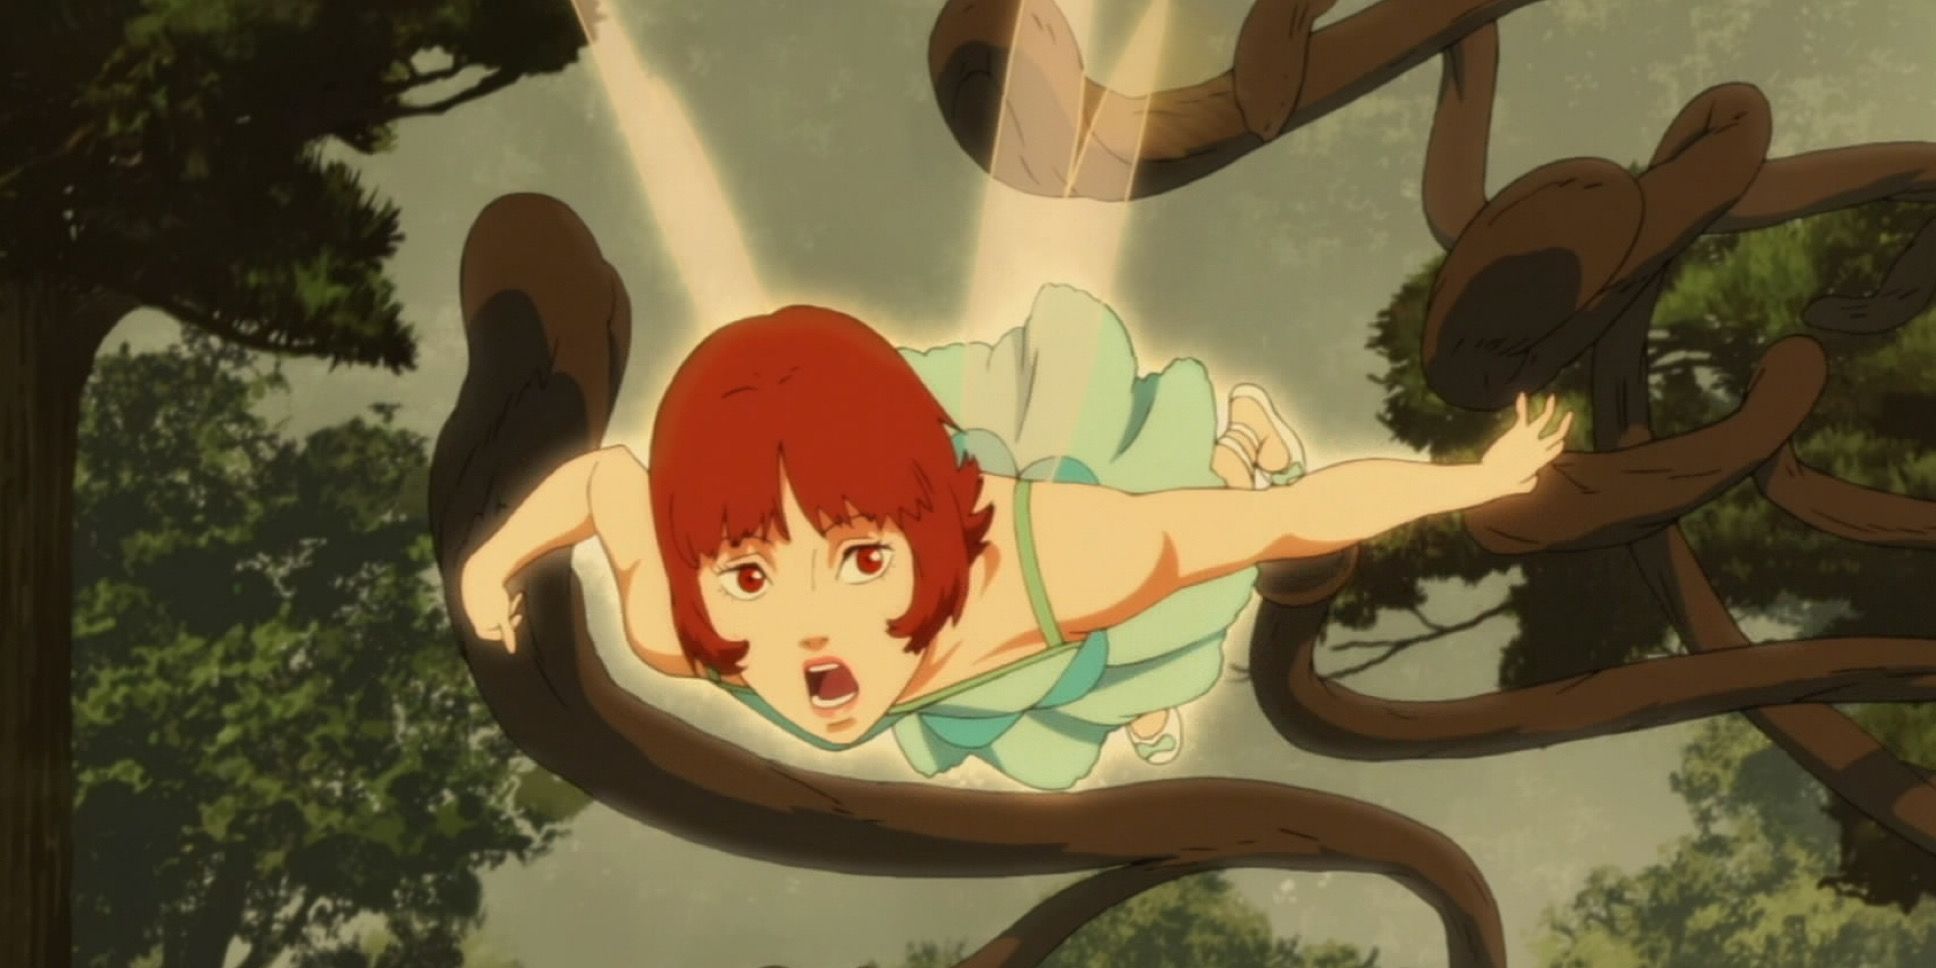 From the anime film Paprika